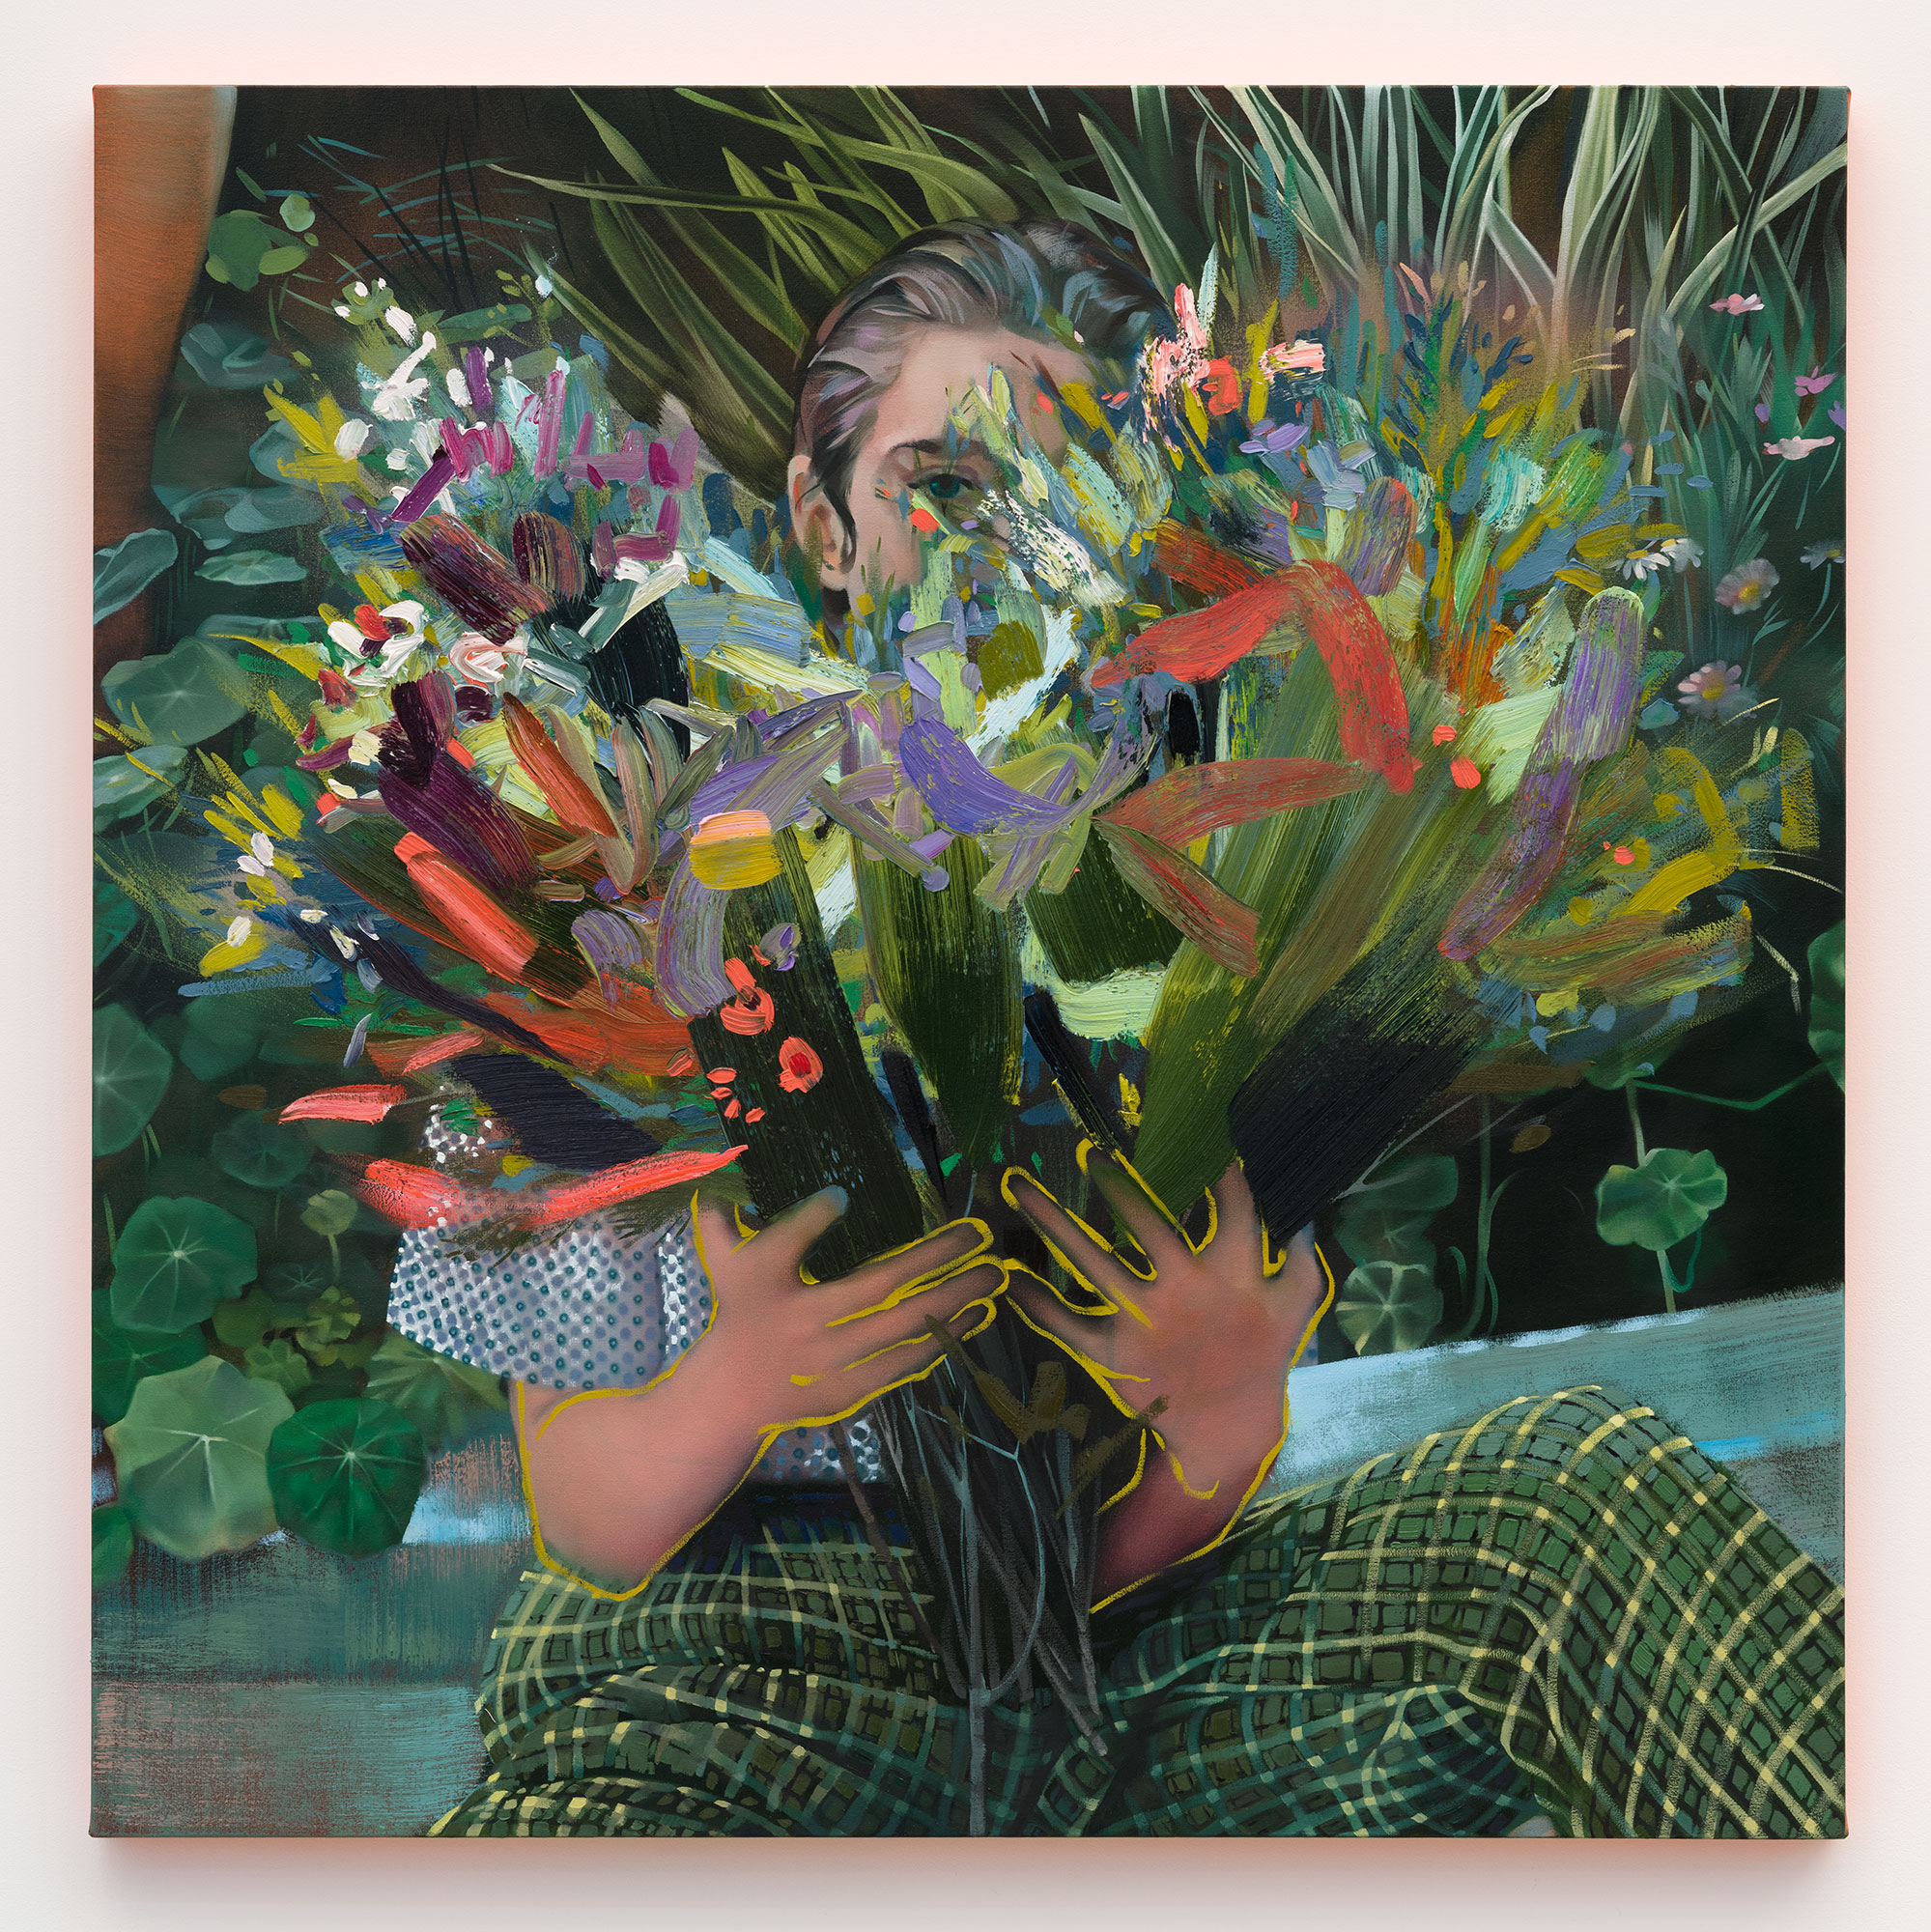 Rebecca Campbell / 
Angus with Flowers, 2022 / 
oil on canvas / 
48 x 48 in. (121.9 x 121.9 cm)